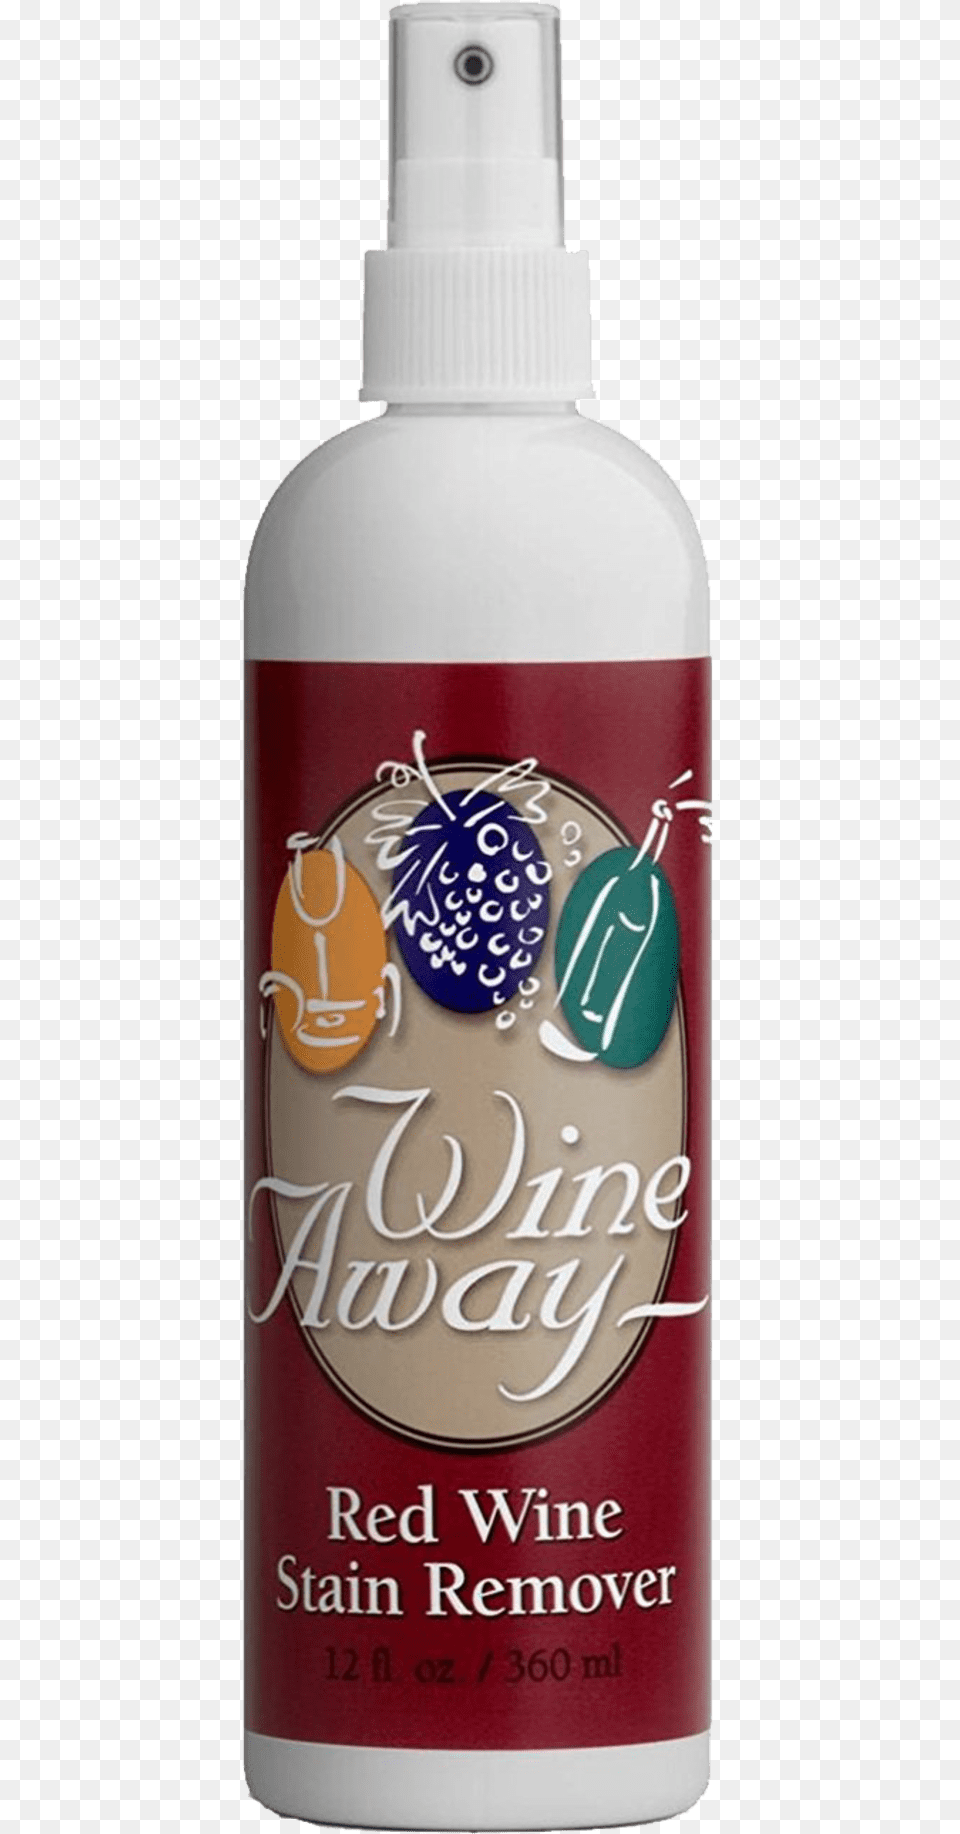 Wine Away Stain Remover, Bottle, Lotion, Cosmetics, Tin Free Png